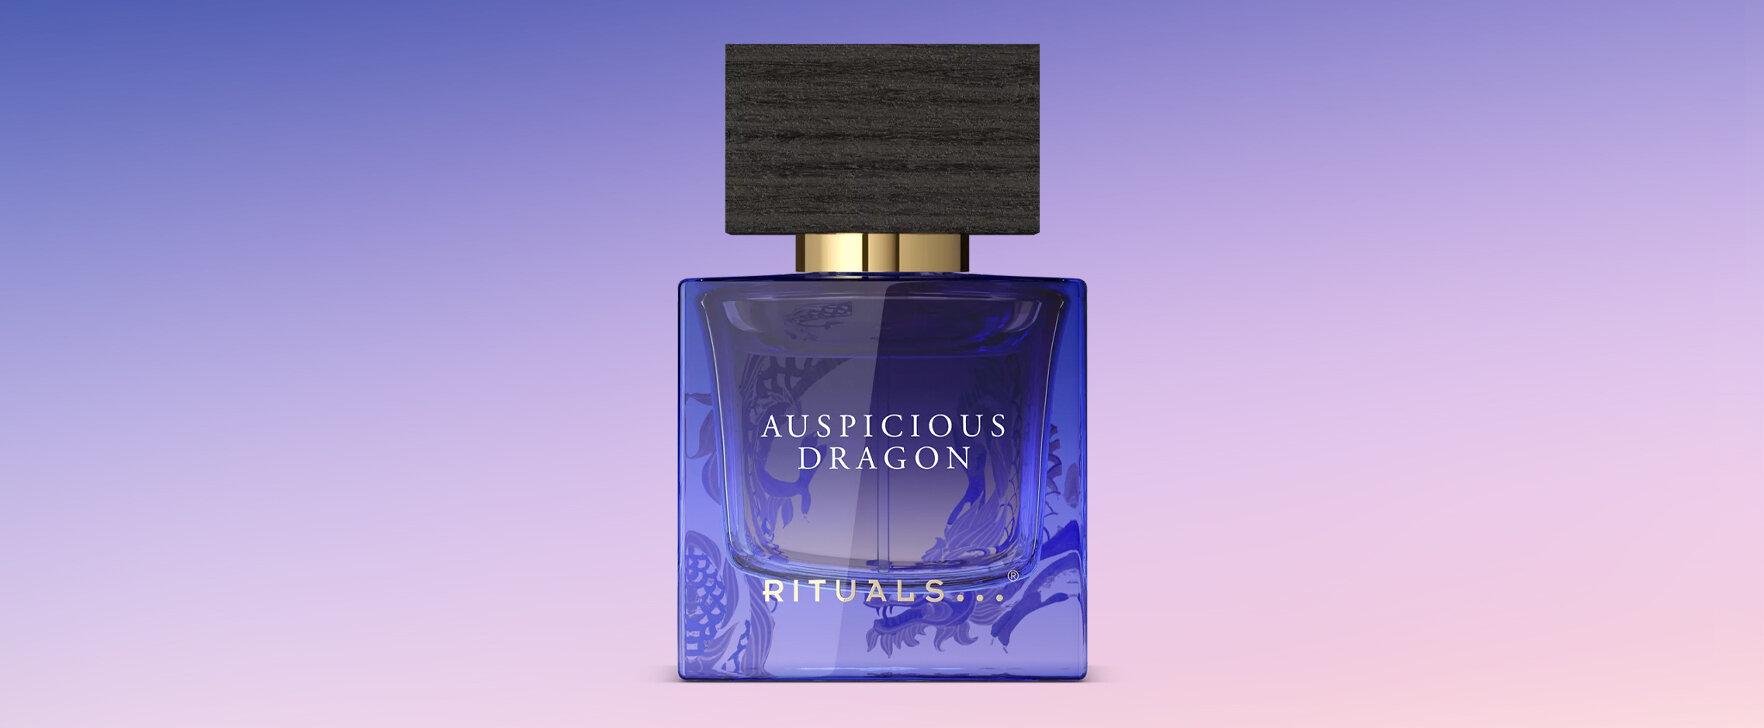 Inspired by Chinese Mythology: The Limited Unisex Fragrance "Auspicious Dragon" From Rituals